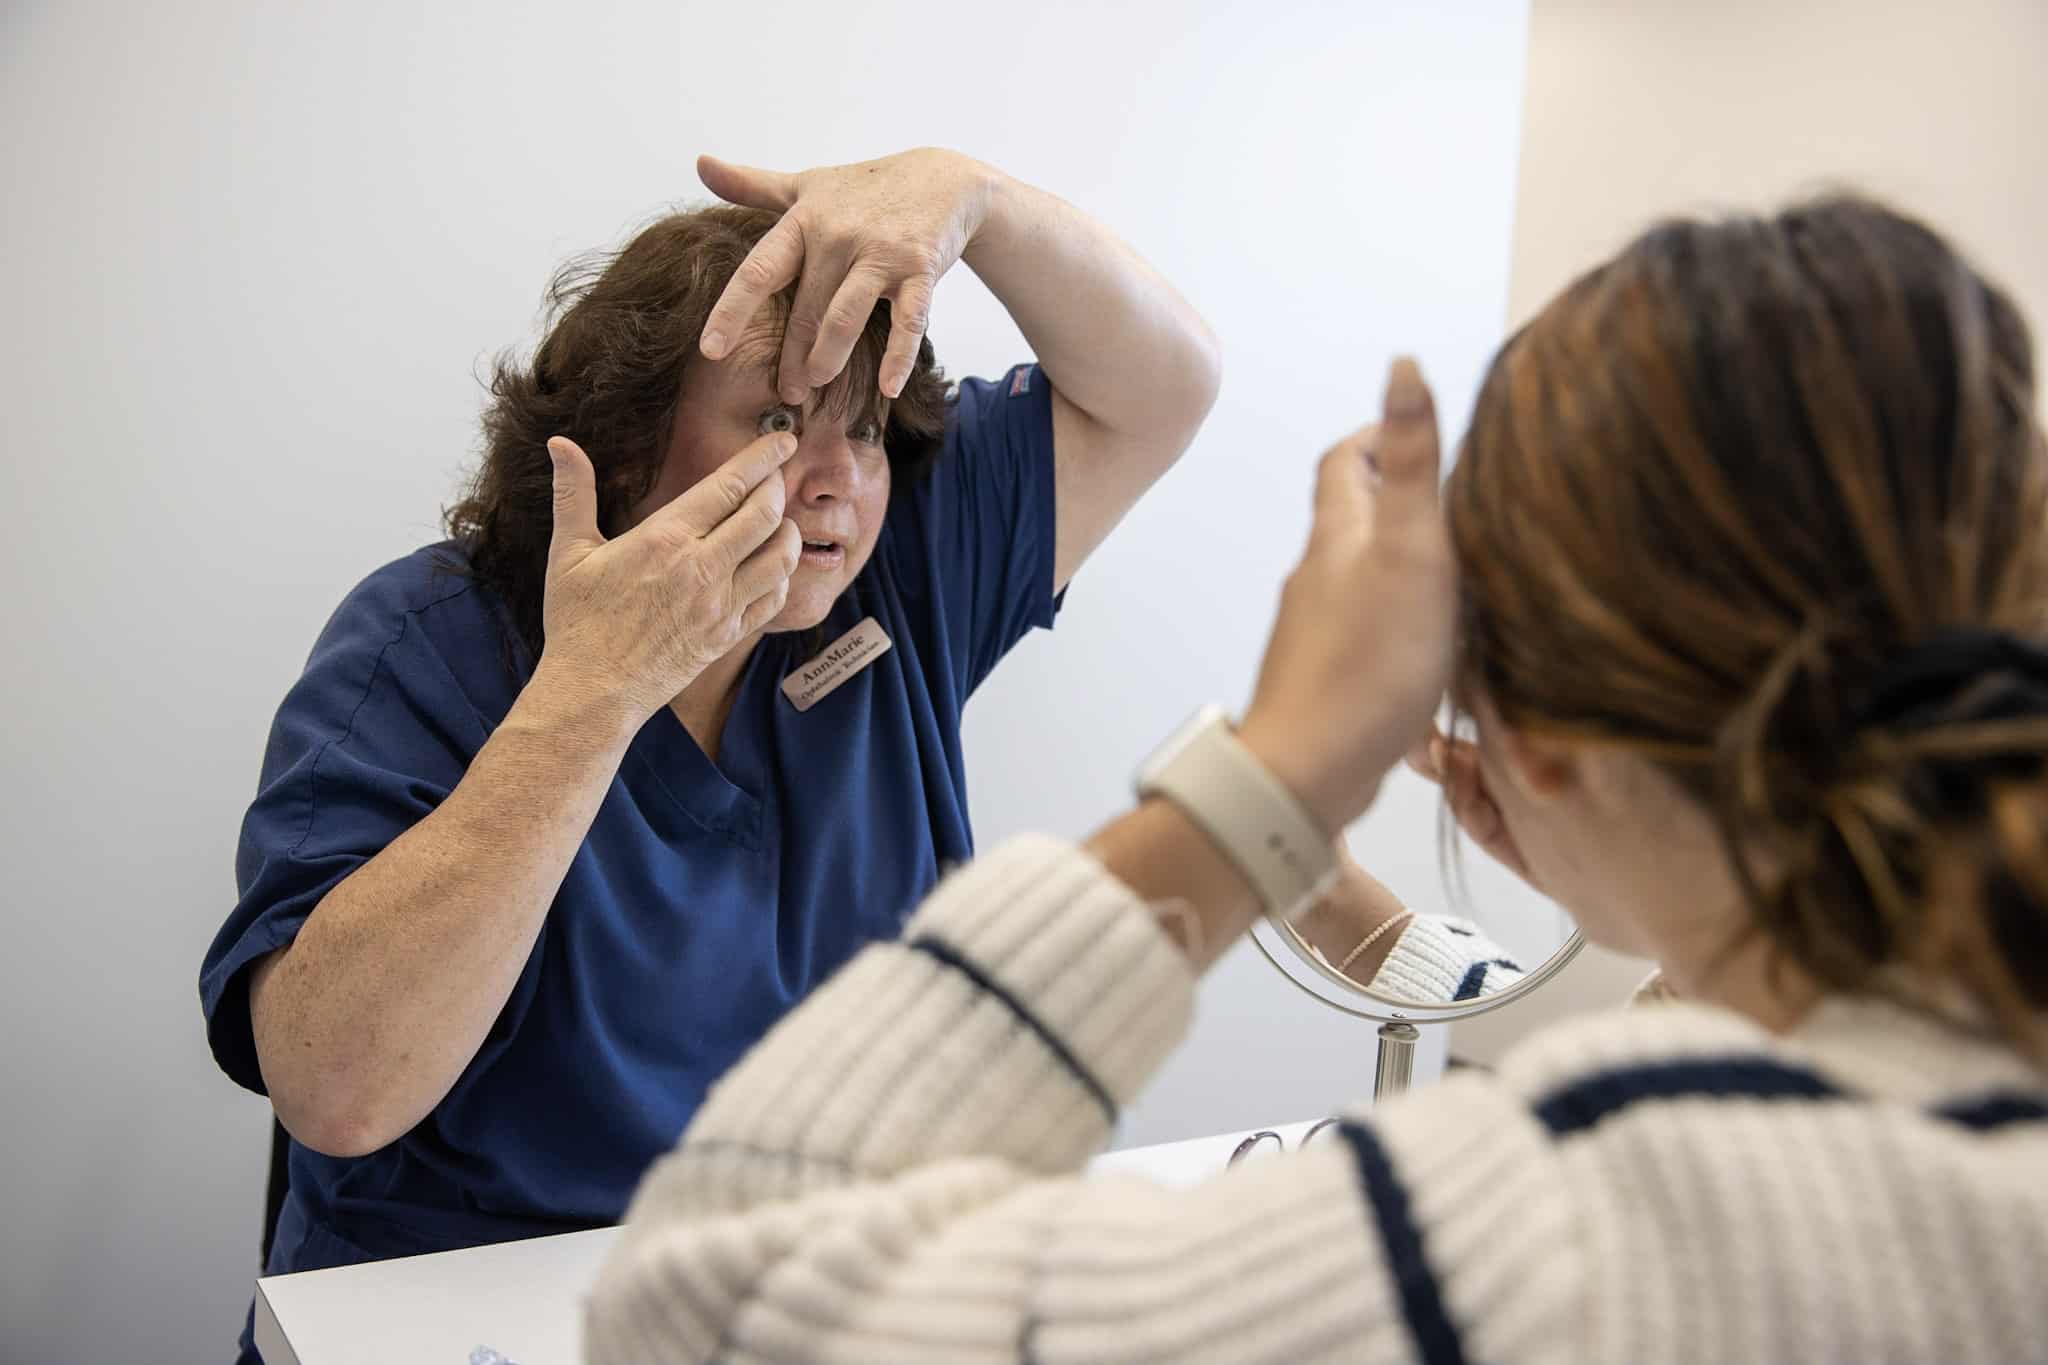 Optometric Technician AnnMarie using her hands to widen her eye to show to a female patient how to properly put in contacts.